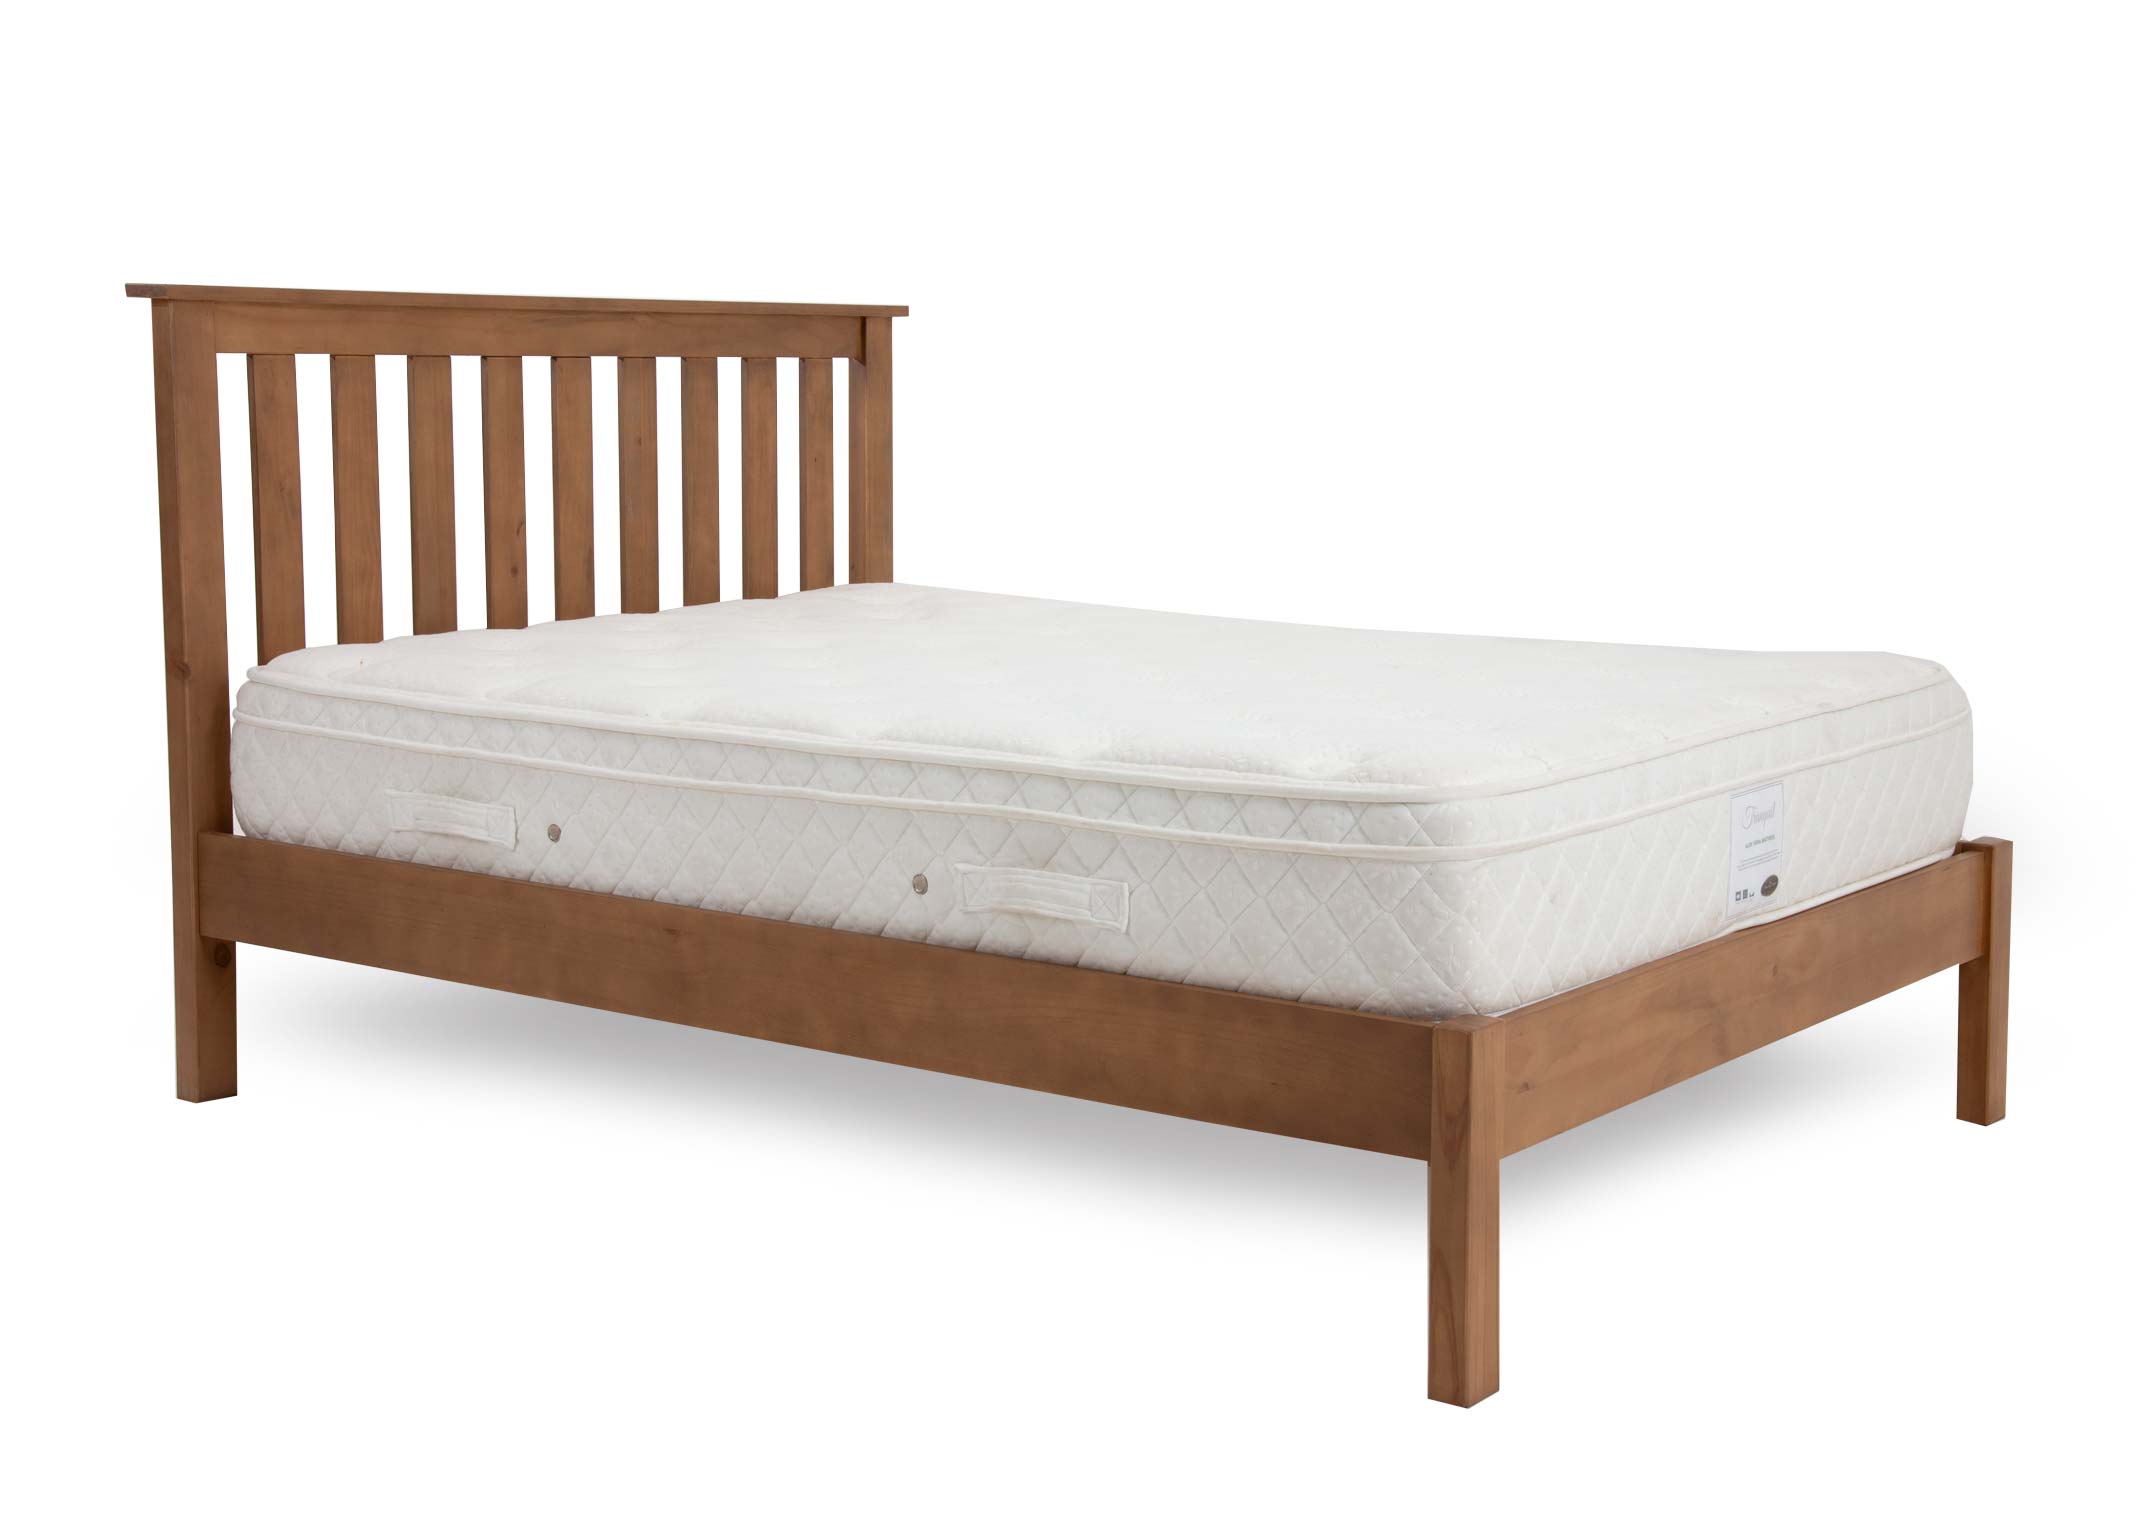 Small Single Bed Dimensions & Drawings